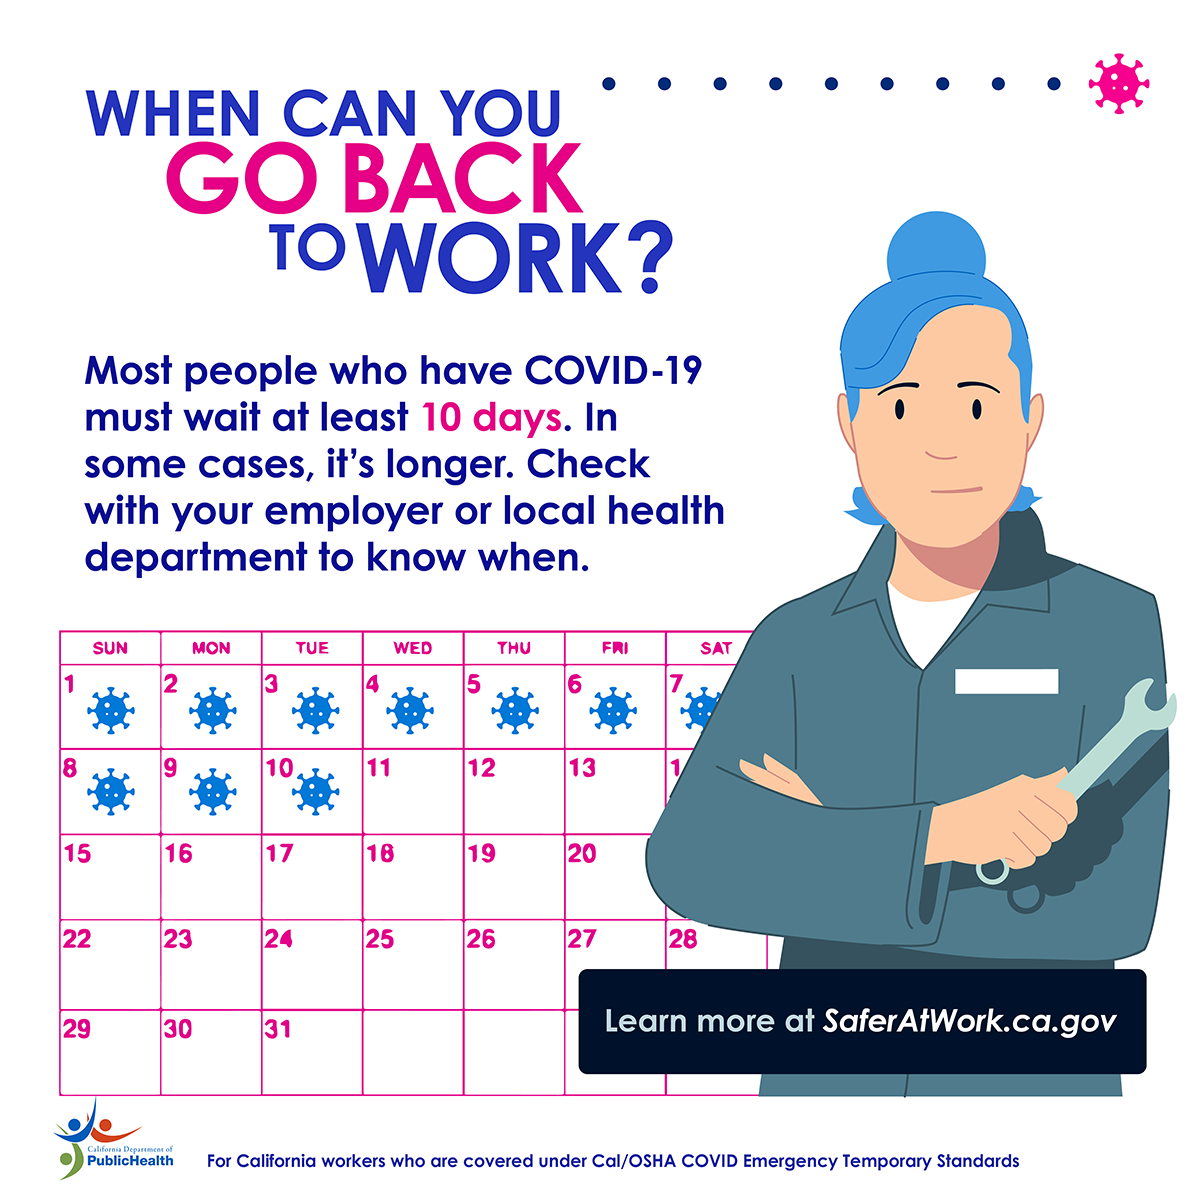 When can you go back to work? Most people who have COVID-19 must wait at least 10 days. In some cases, it's longer. check with your employer or local health department to know when.